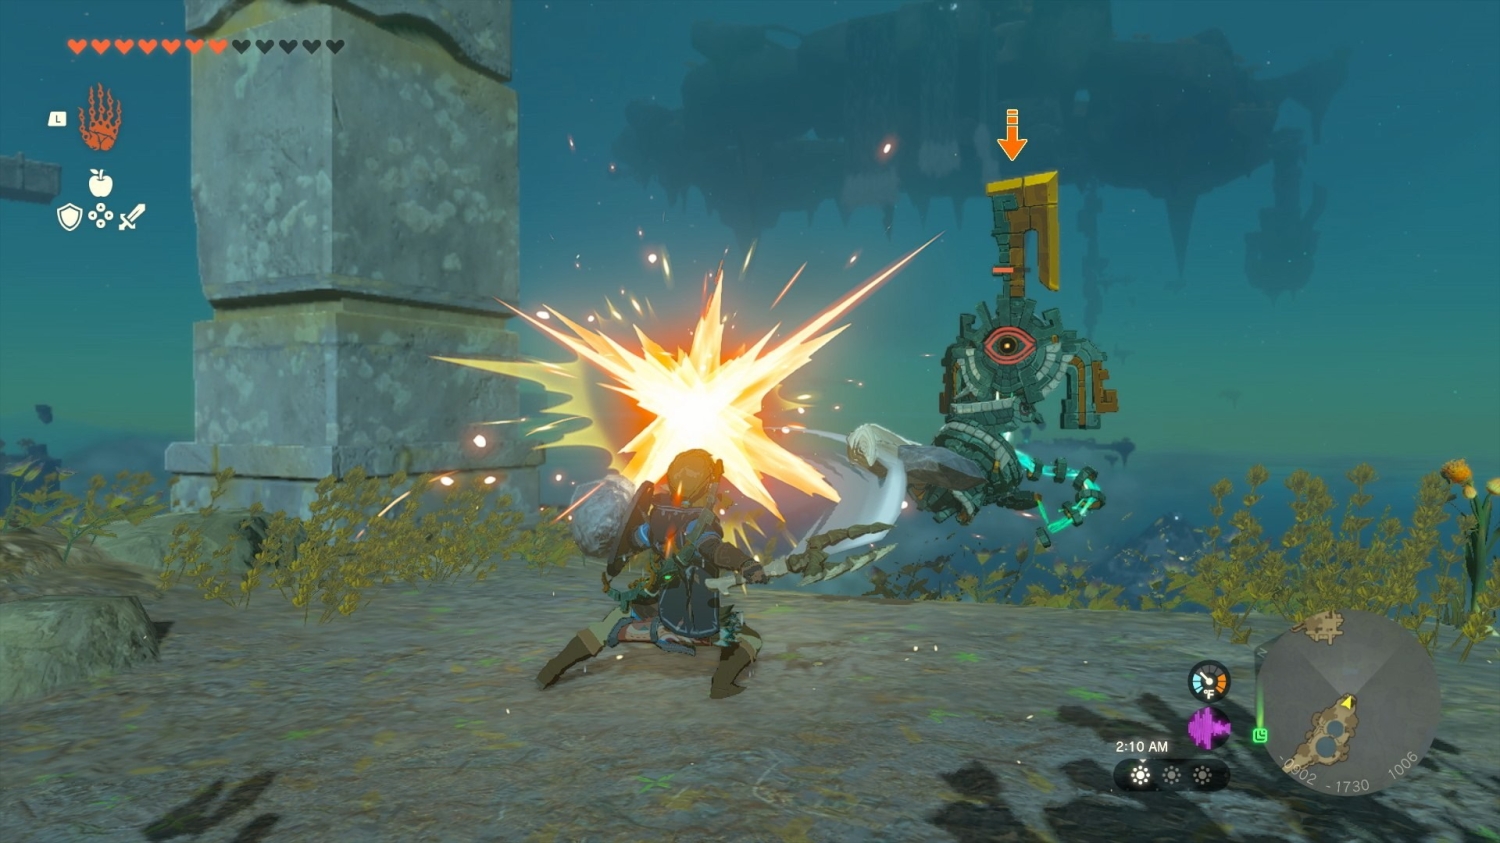 People are emulating the new Zelda game on PC a week before its official  release